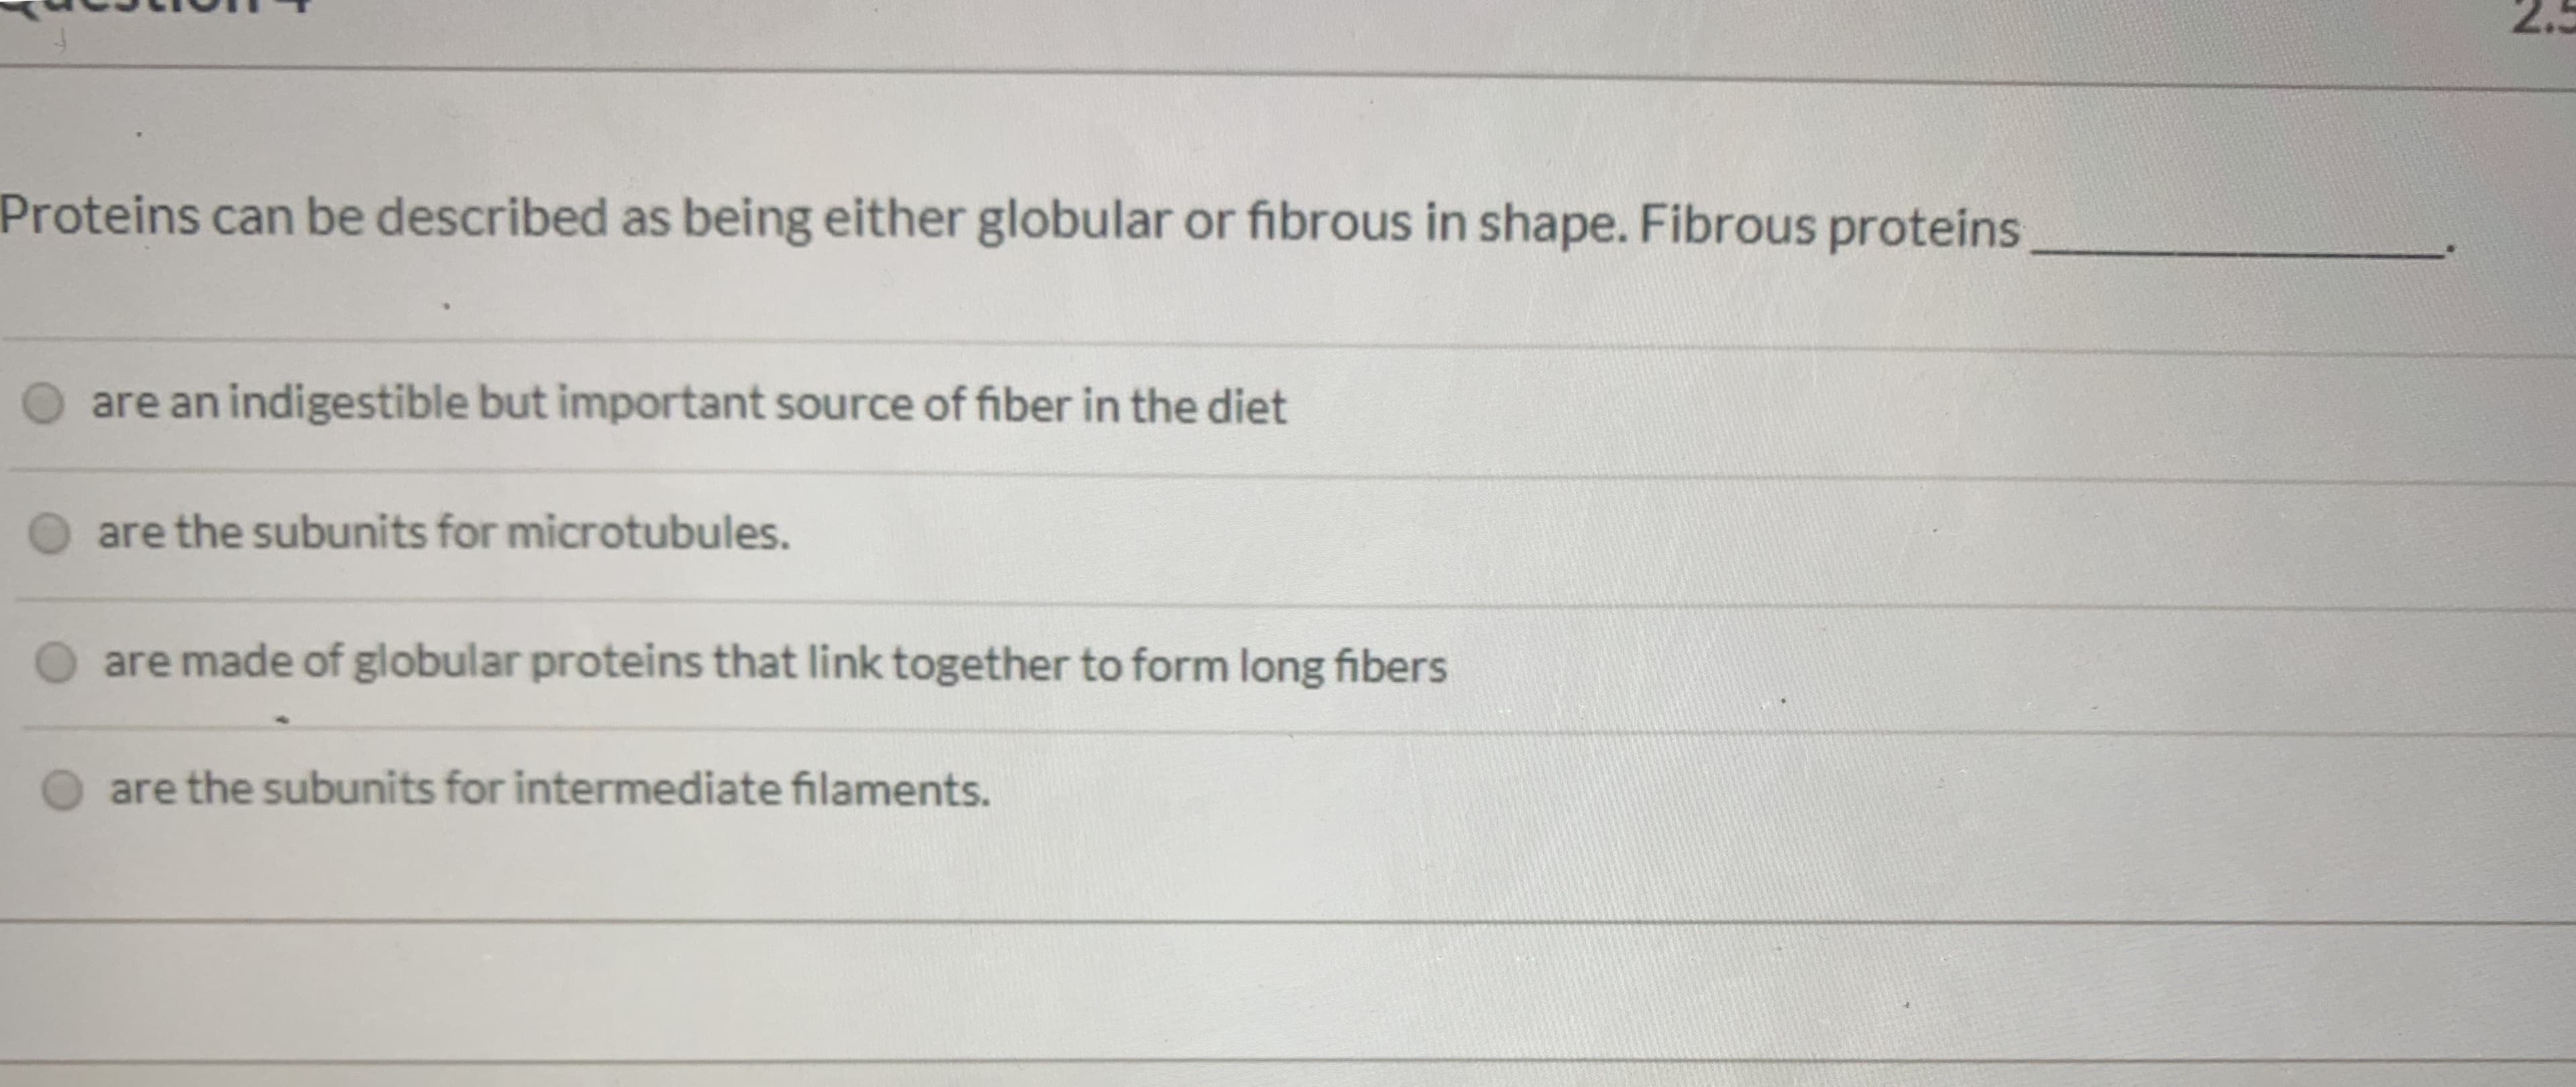 Proteins can be described as being either globular or fibrous in shape. Fibrous proteins
O are an indigestible but important source of fiber in the diet
are the subunits for microtubules.
are made of globular proteins that link together to form long fibers
are the subunits for intermediate filaments.
